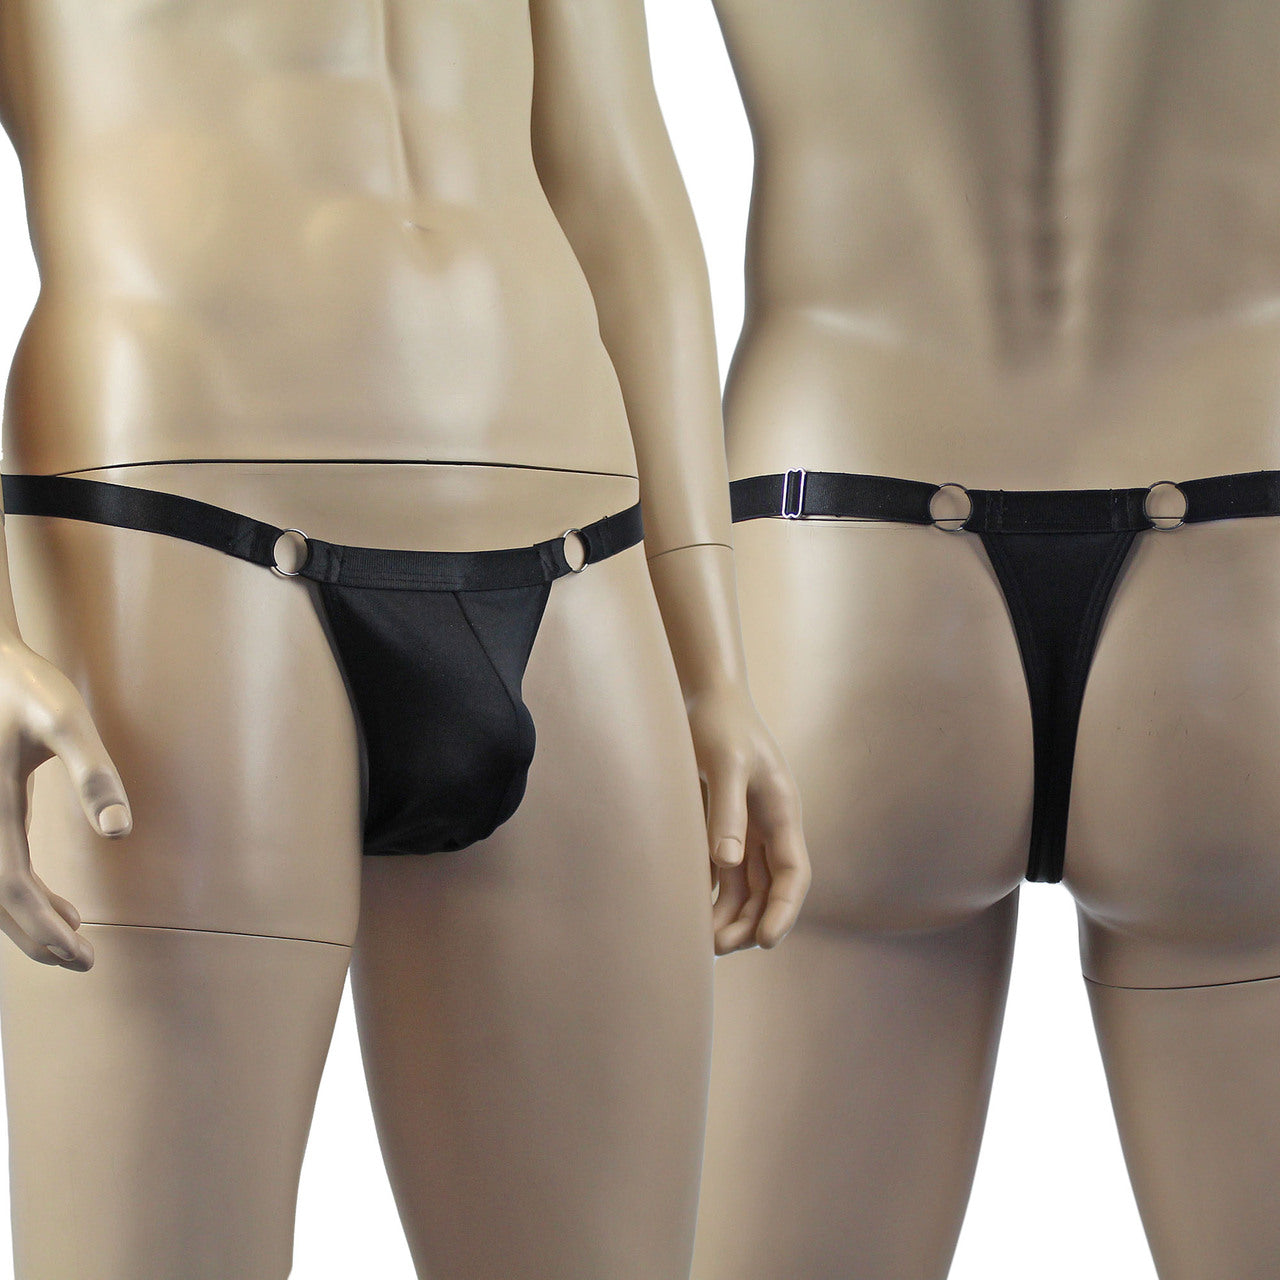 Male Jack Spandex Thong with Ring Sides and Adjustable Strap Black